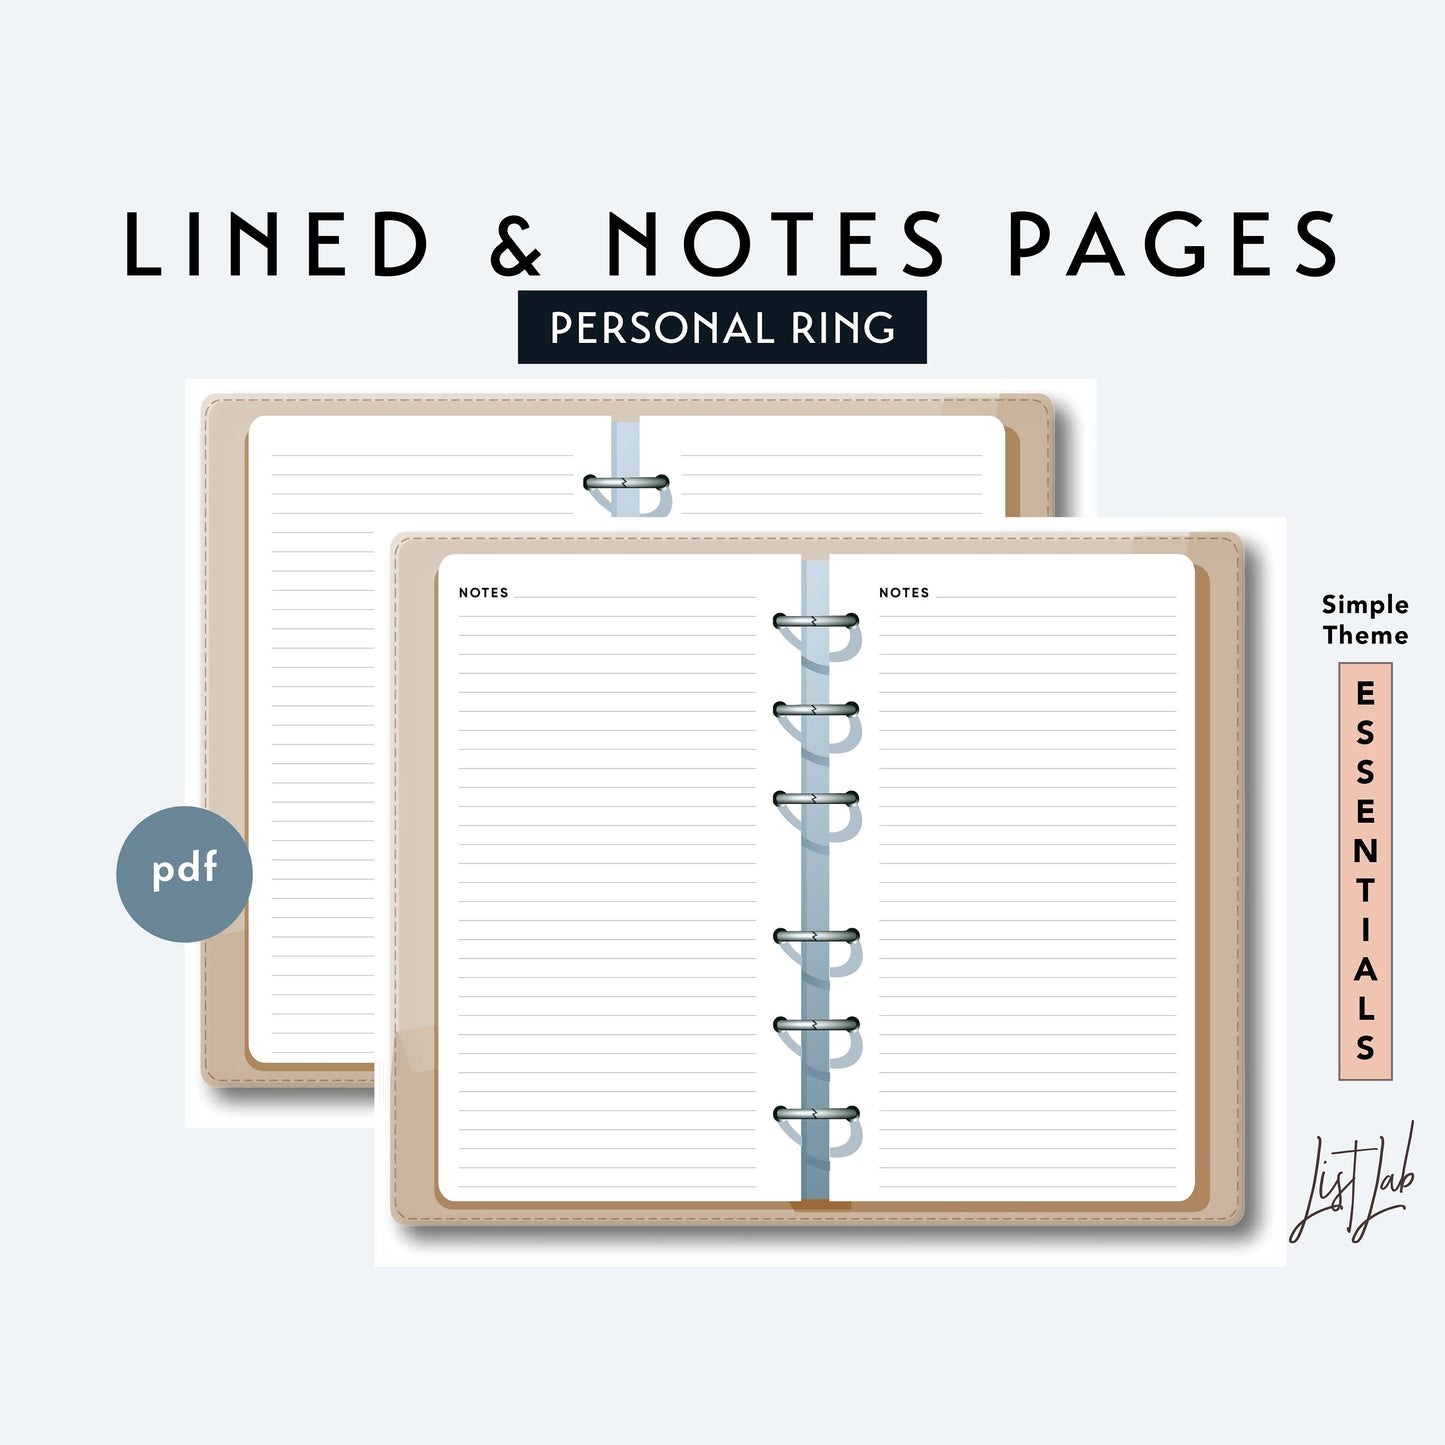 Personal Ring NOTES AND LINED Pages Printable Insert Set